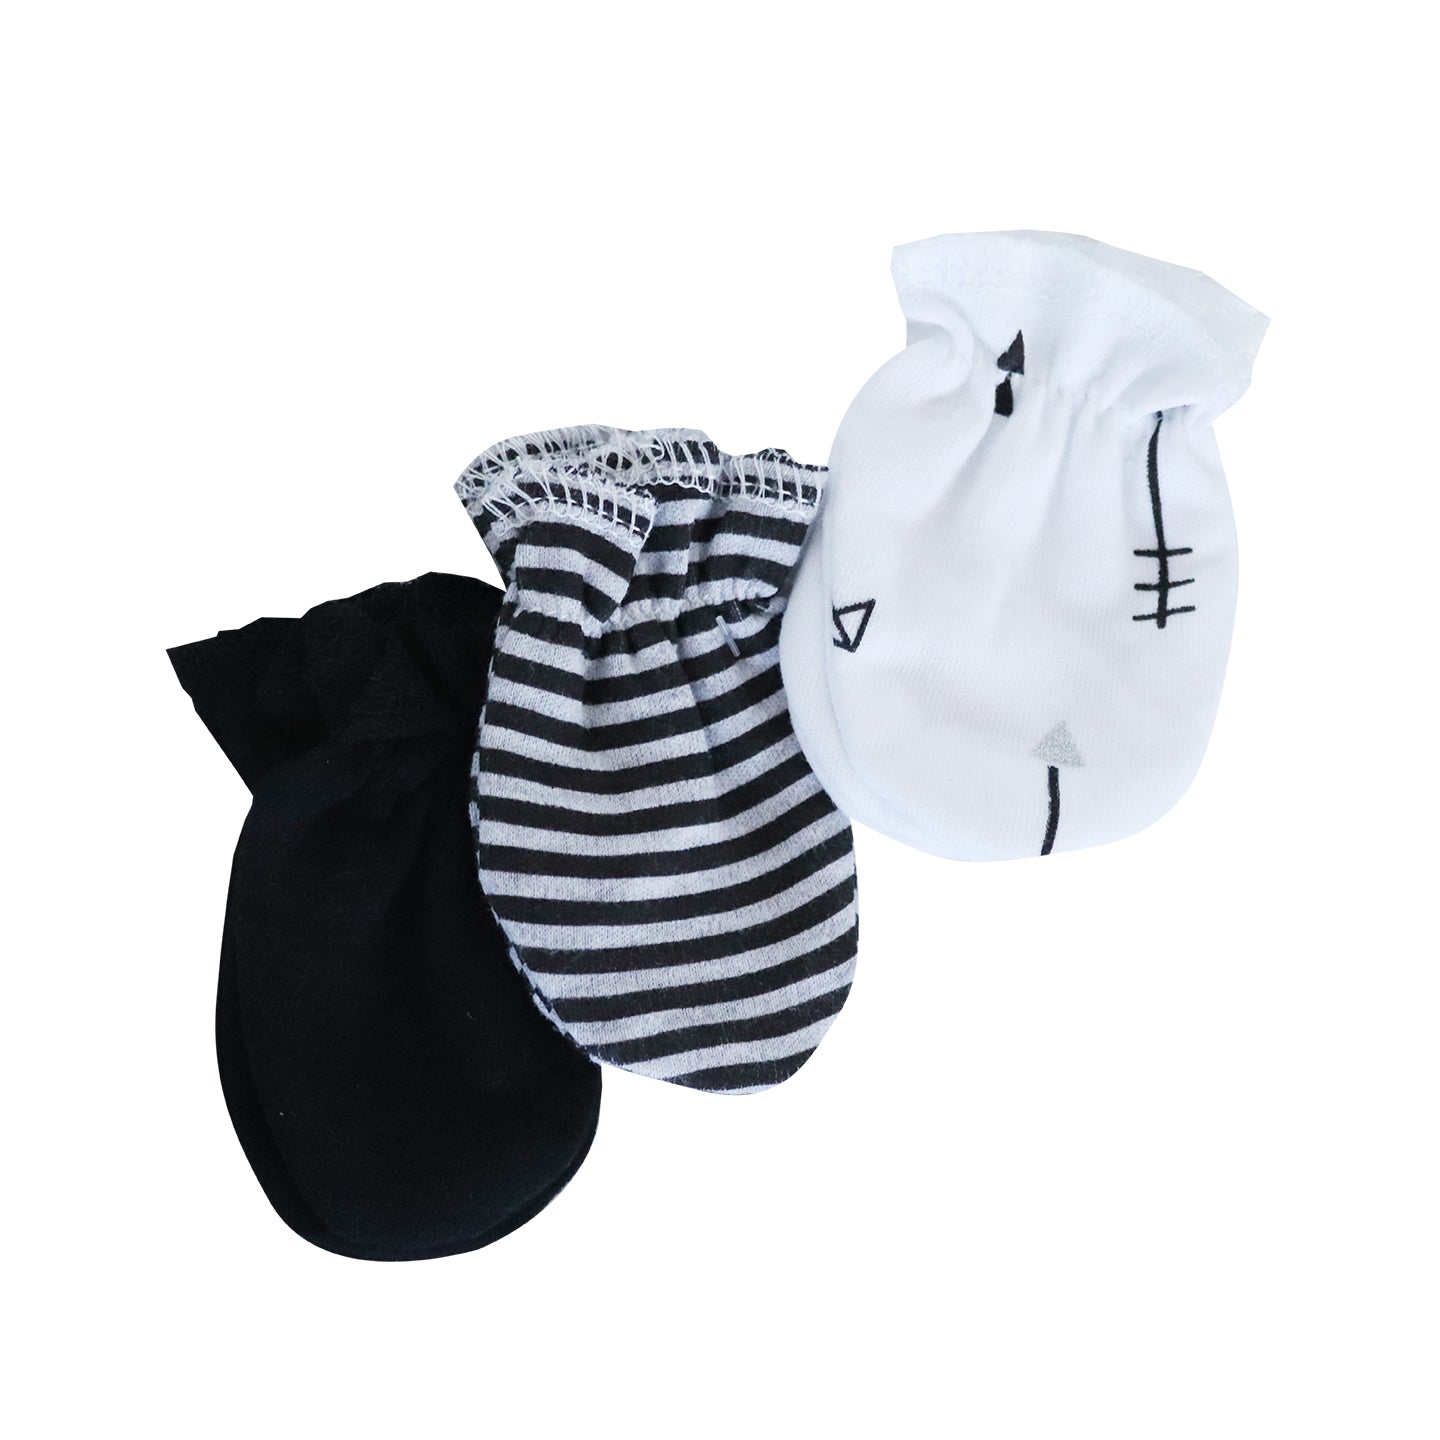 Snuggletime 6-Piece Gift Set - 3 Hats and 3 Mittens